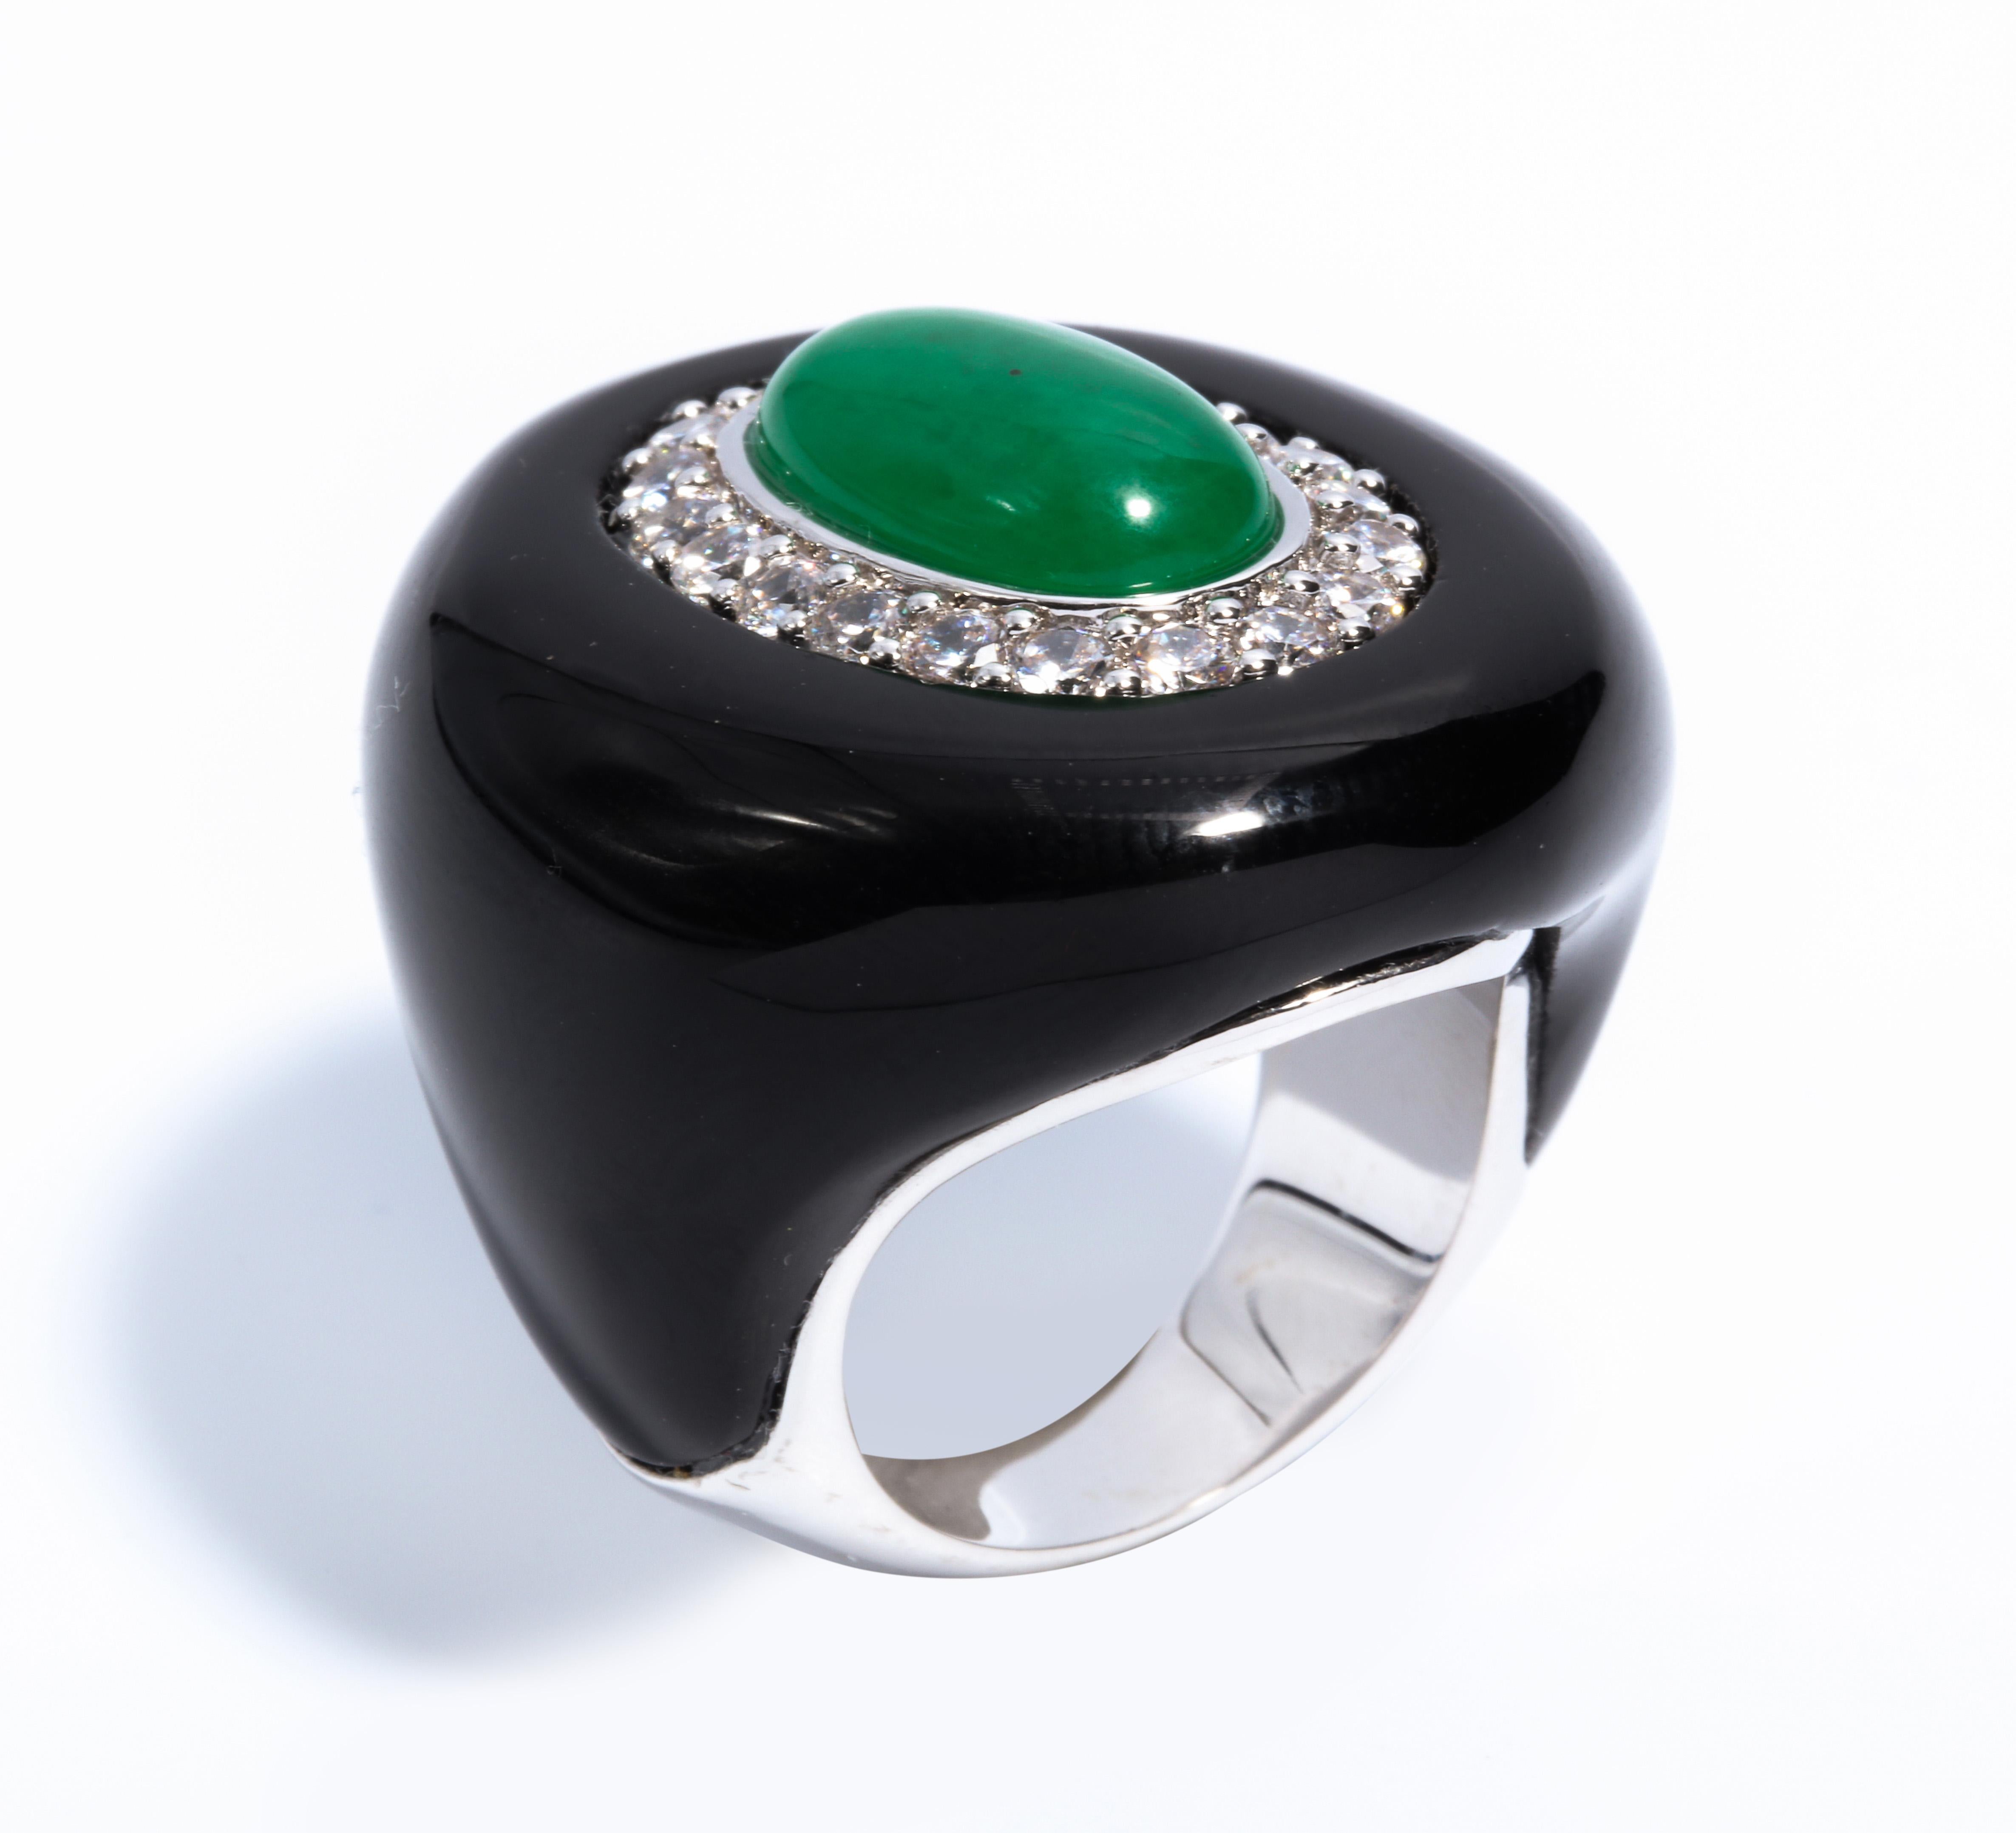 Magnificent Costume Jewelry Art Deco Style Palm Beach Faux Diamond Jade Onyx Large Ring. Available to order 3 weeks in other sizes. This is a size 6 3/4